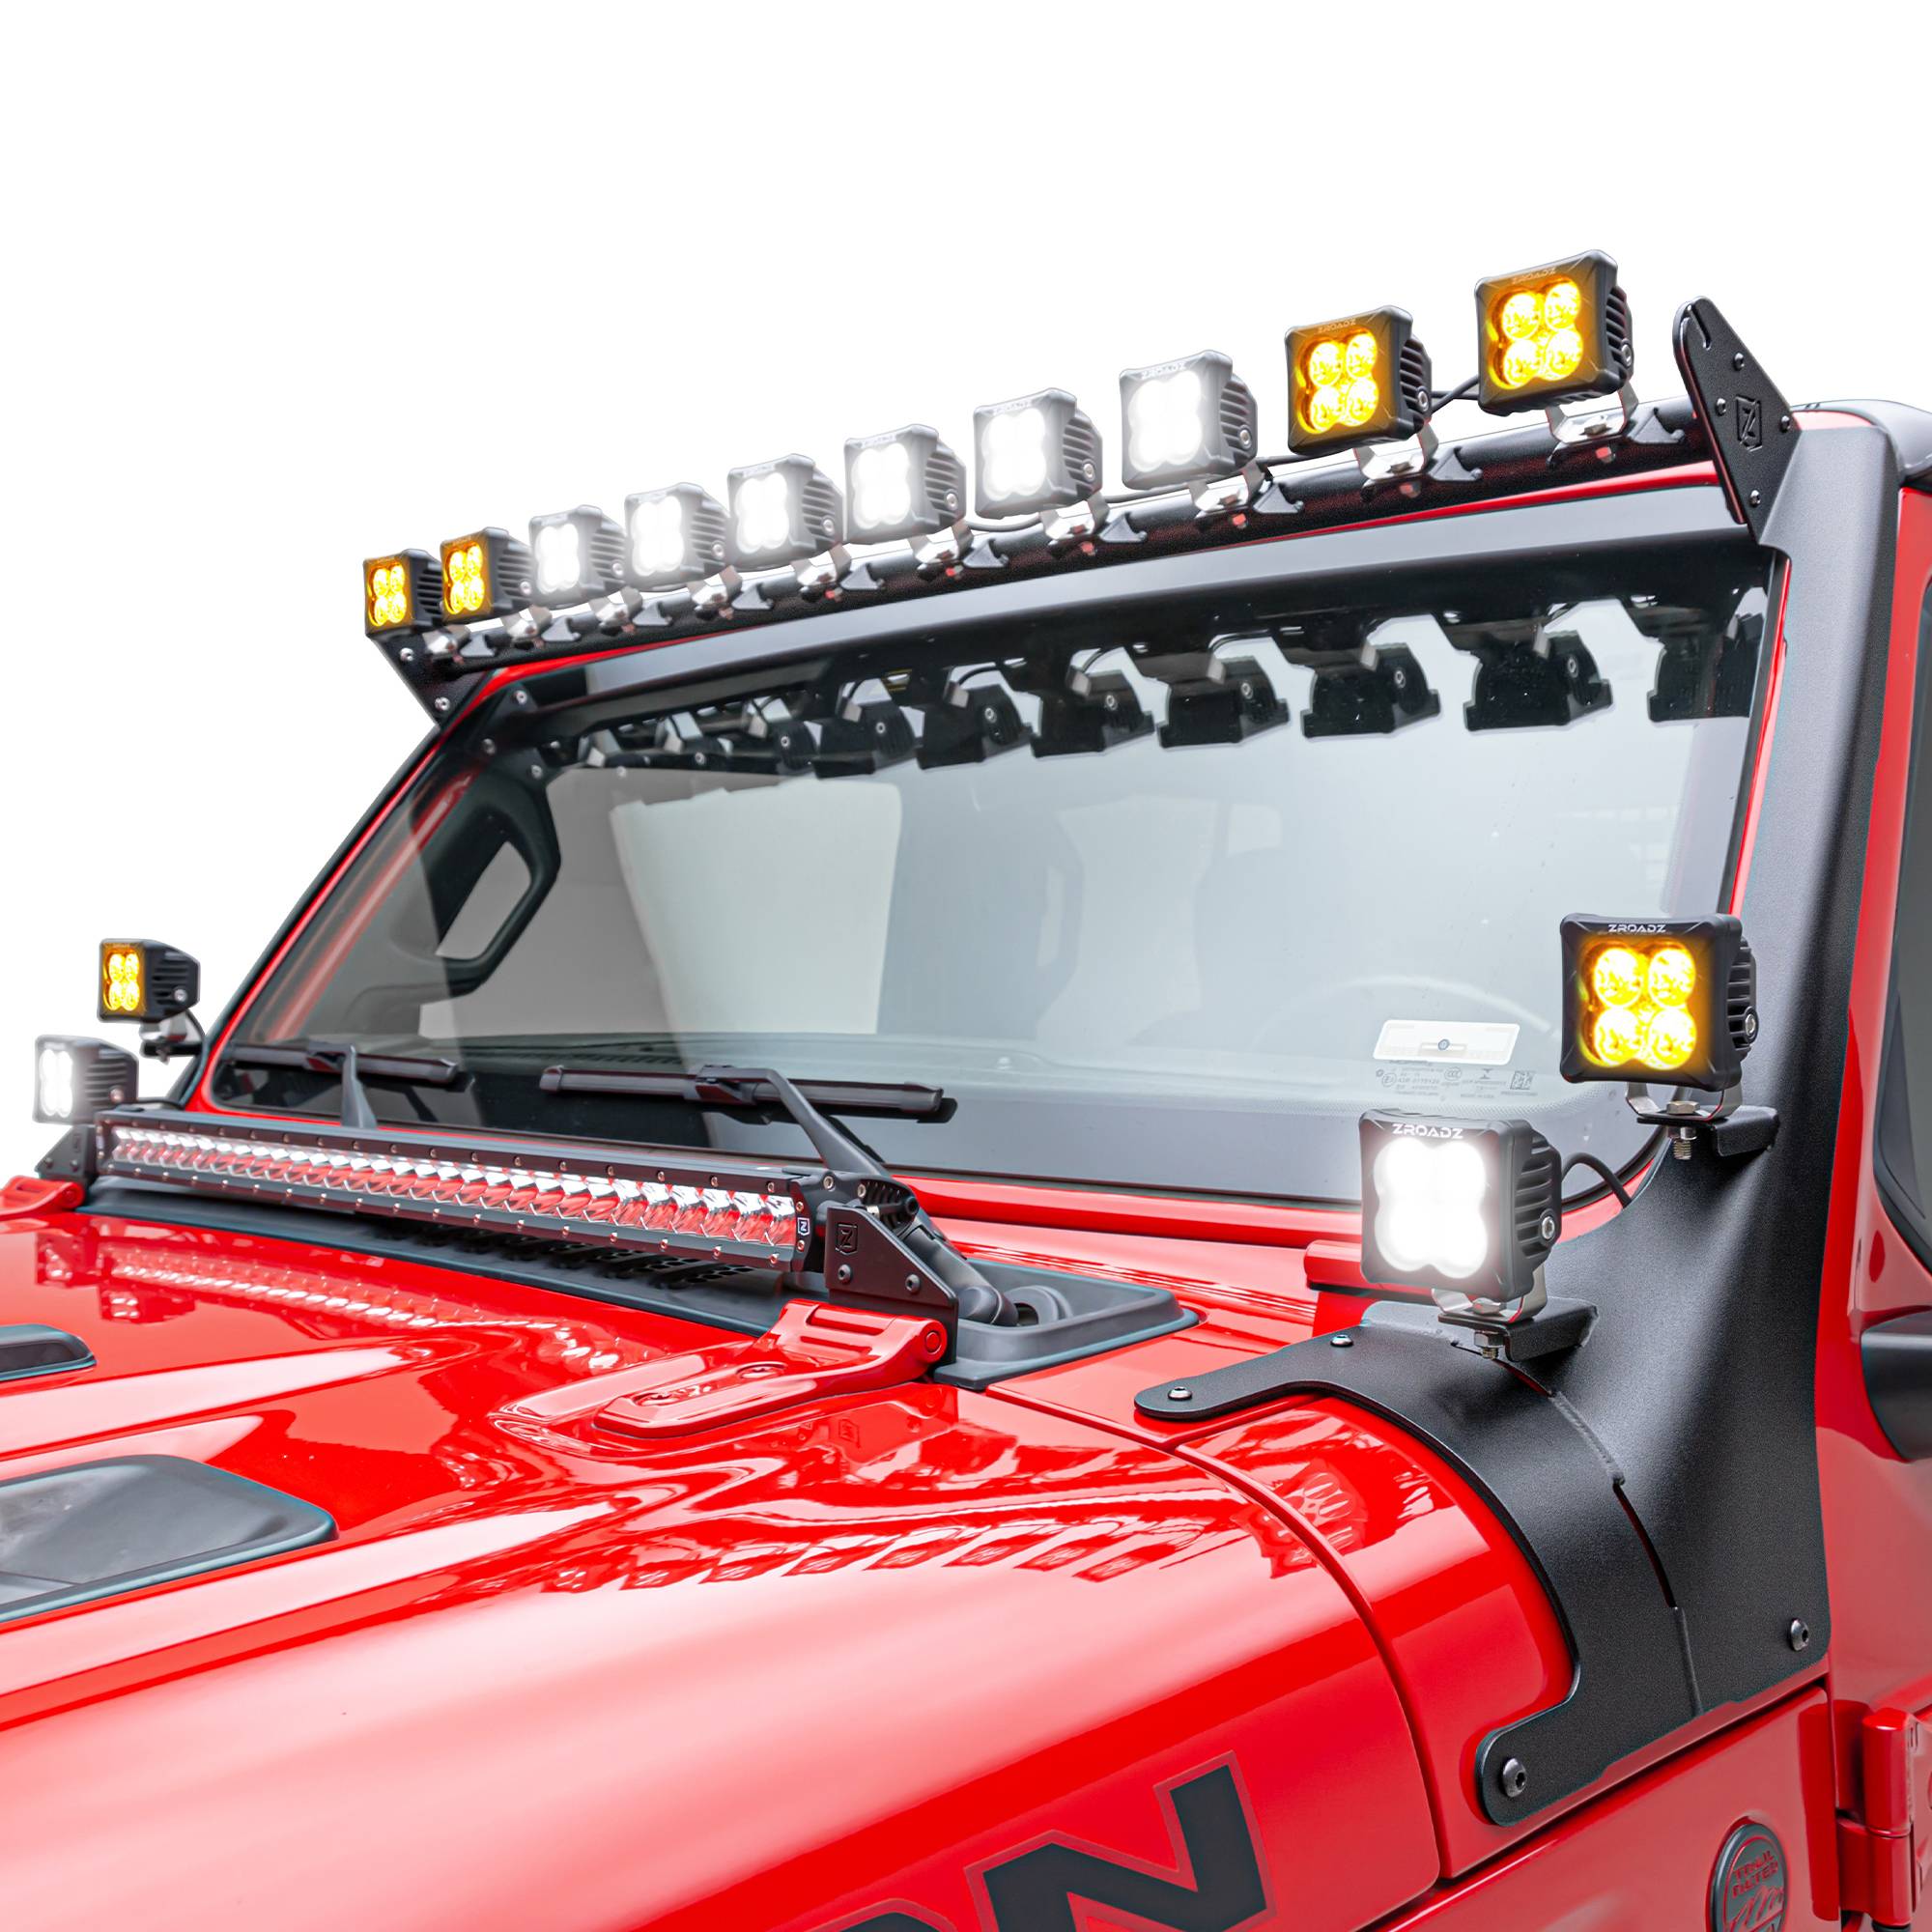 ZROADZ OFF ROAD PRODUCTS - 2018-2023 Jeep JL/2019-2023 Jeep Gladiator, Multi-LED Roof Cross Bar and 4-Pod A-Pillar Complete KIT, Includes (14) 3-Inch ZROADZ Light Pods - Part # Z934931-KIT4AW